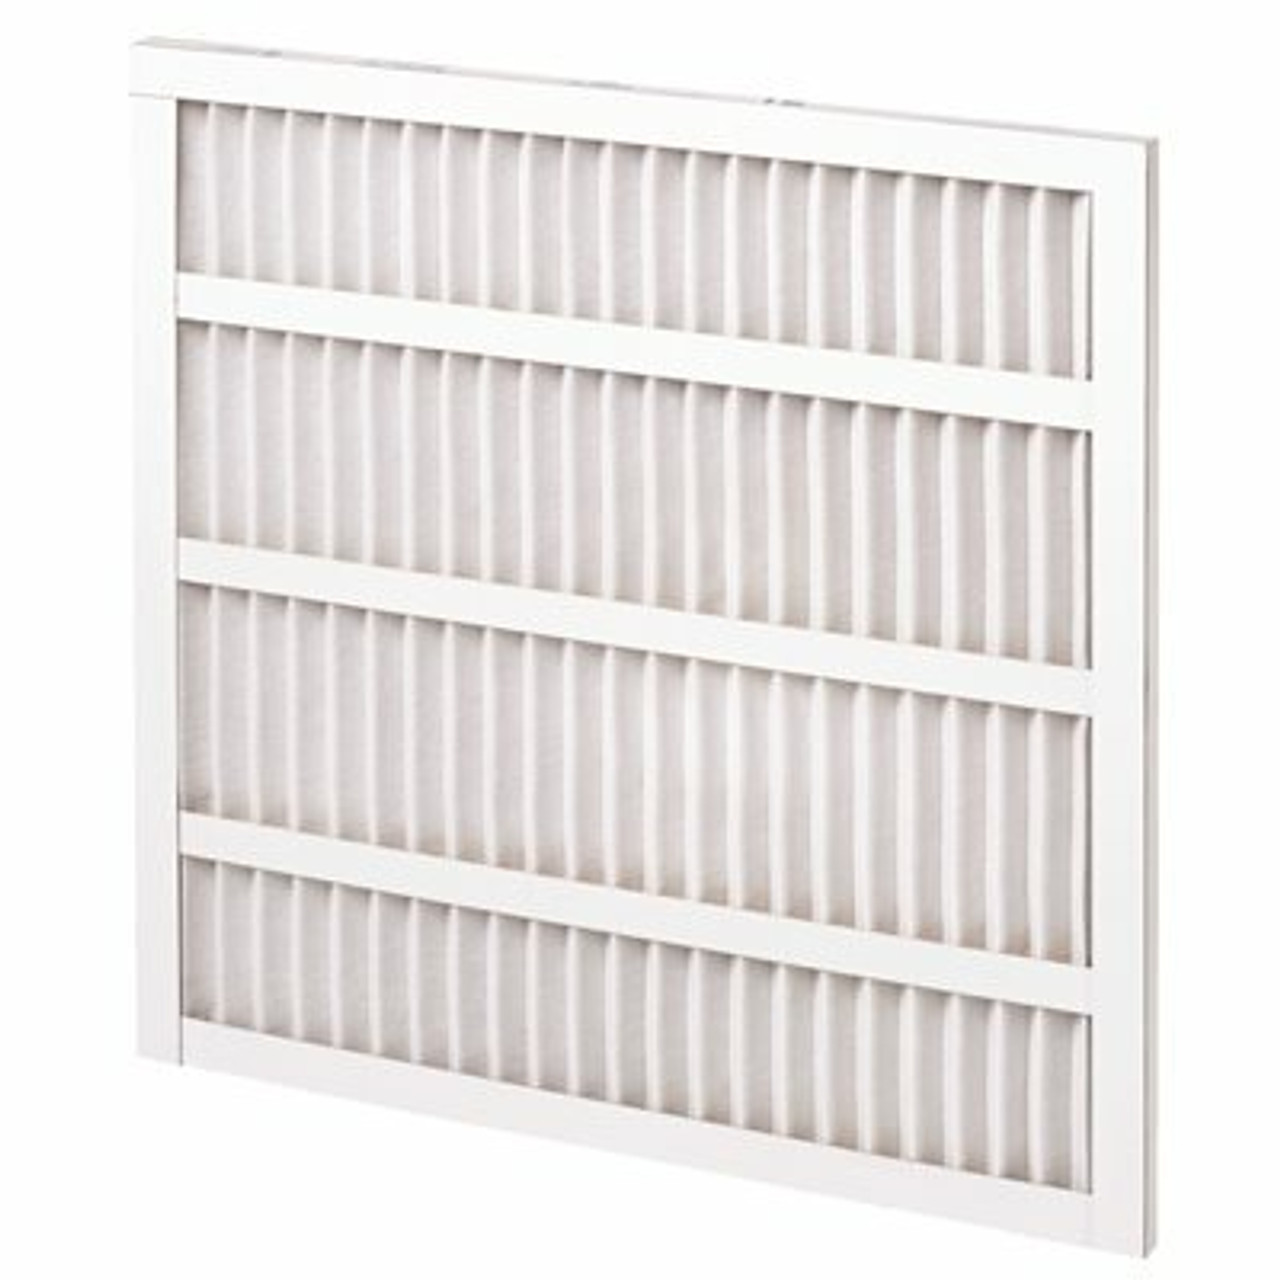 25 In. X 25 In. X 1 Pleated Air Filter Standard Capacity Self-Supported MERV 8 (12-Case)